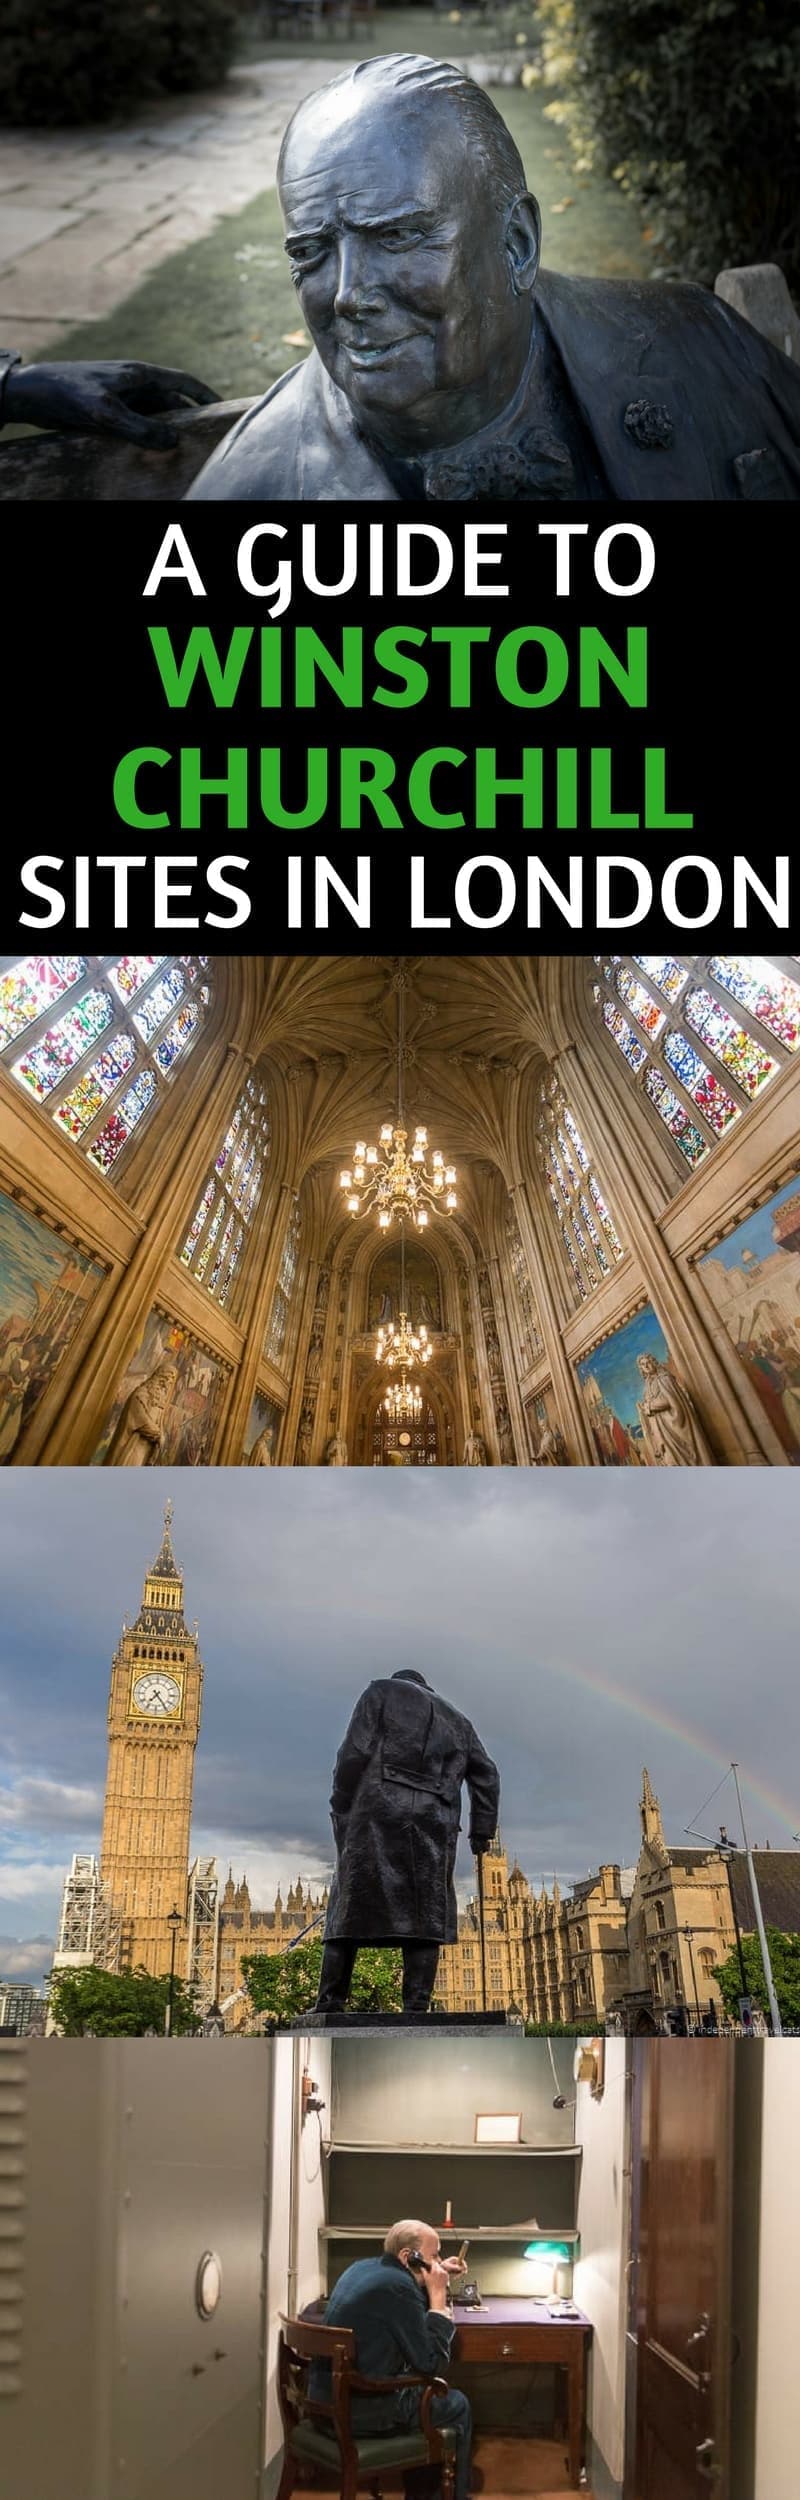 This is a comprehensive guide to Winston Churchill sites in London, England, UK. It covers Churchill related museums, attractions, statues, memorials, restaurants, hotels, and more! It also includes maps, tips, and resources to help you find Winston Churchill in London and have a great trip! #WinstonChurchill #London #Churchill #England #travel